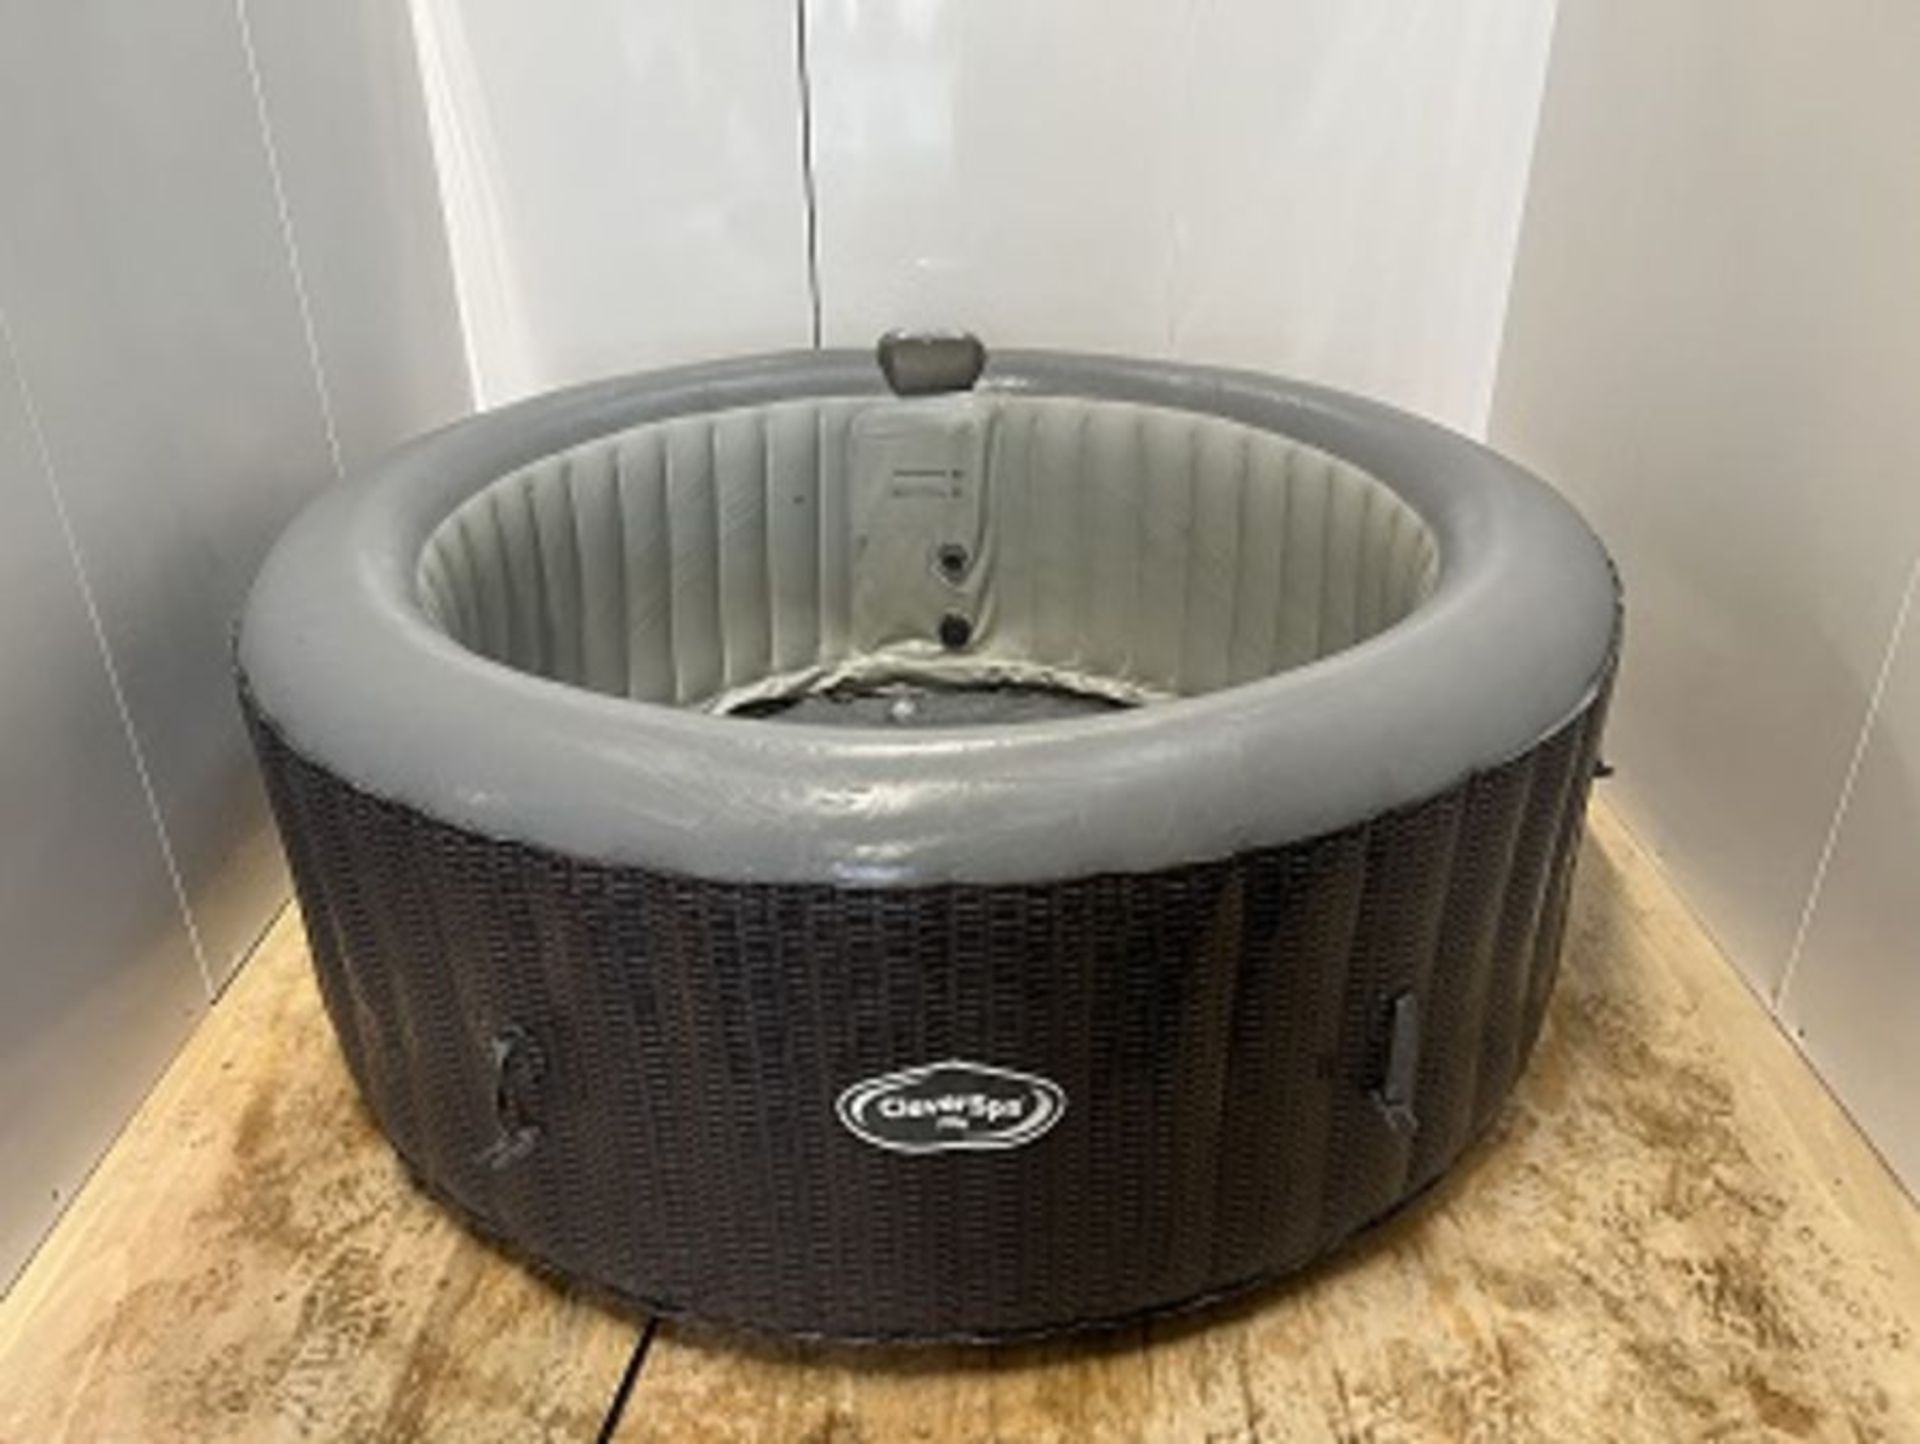 1 x CLEVERSPA MIA 4 PERSON HOT TUB - RRP £413.70 - Image 3 of 3